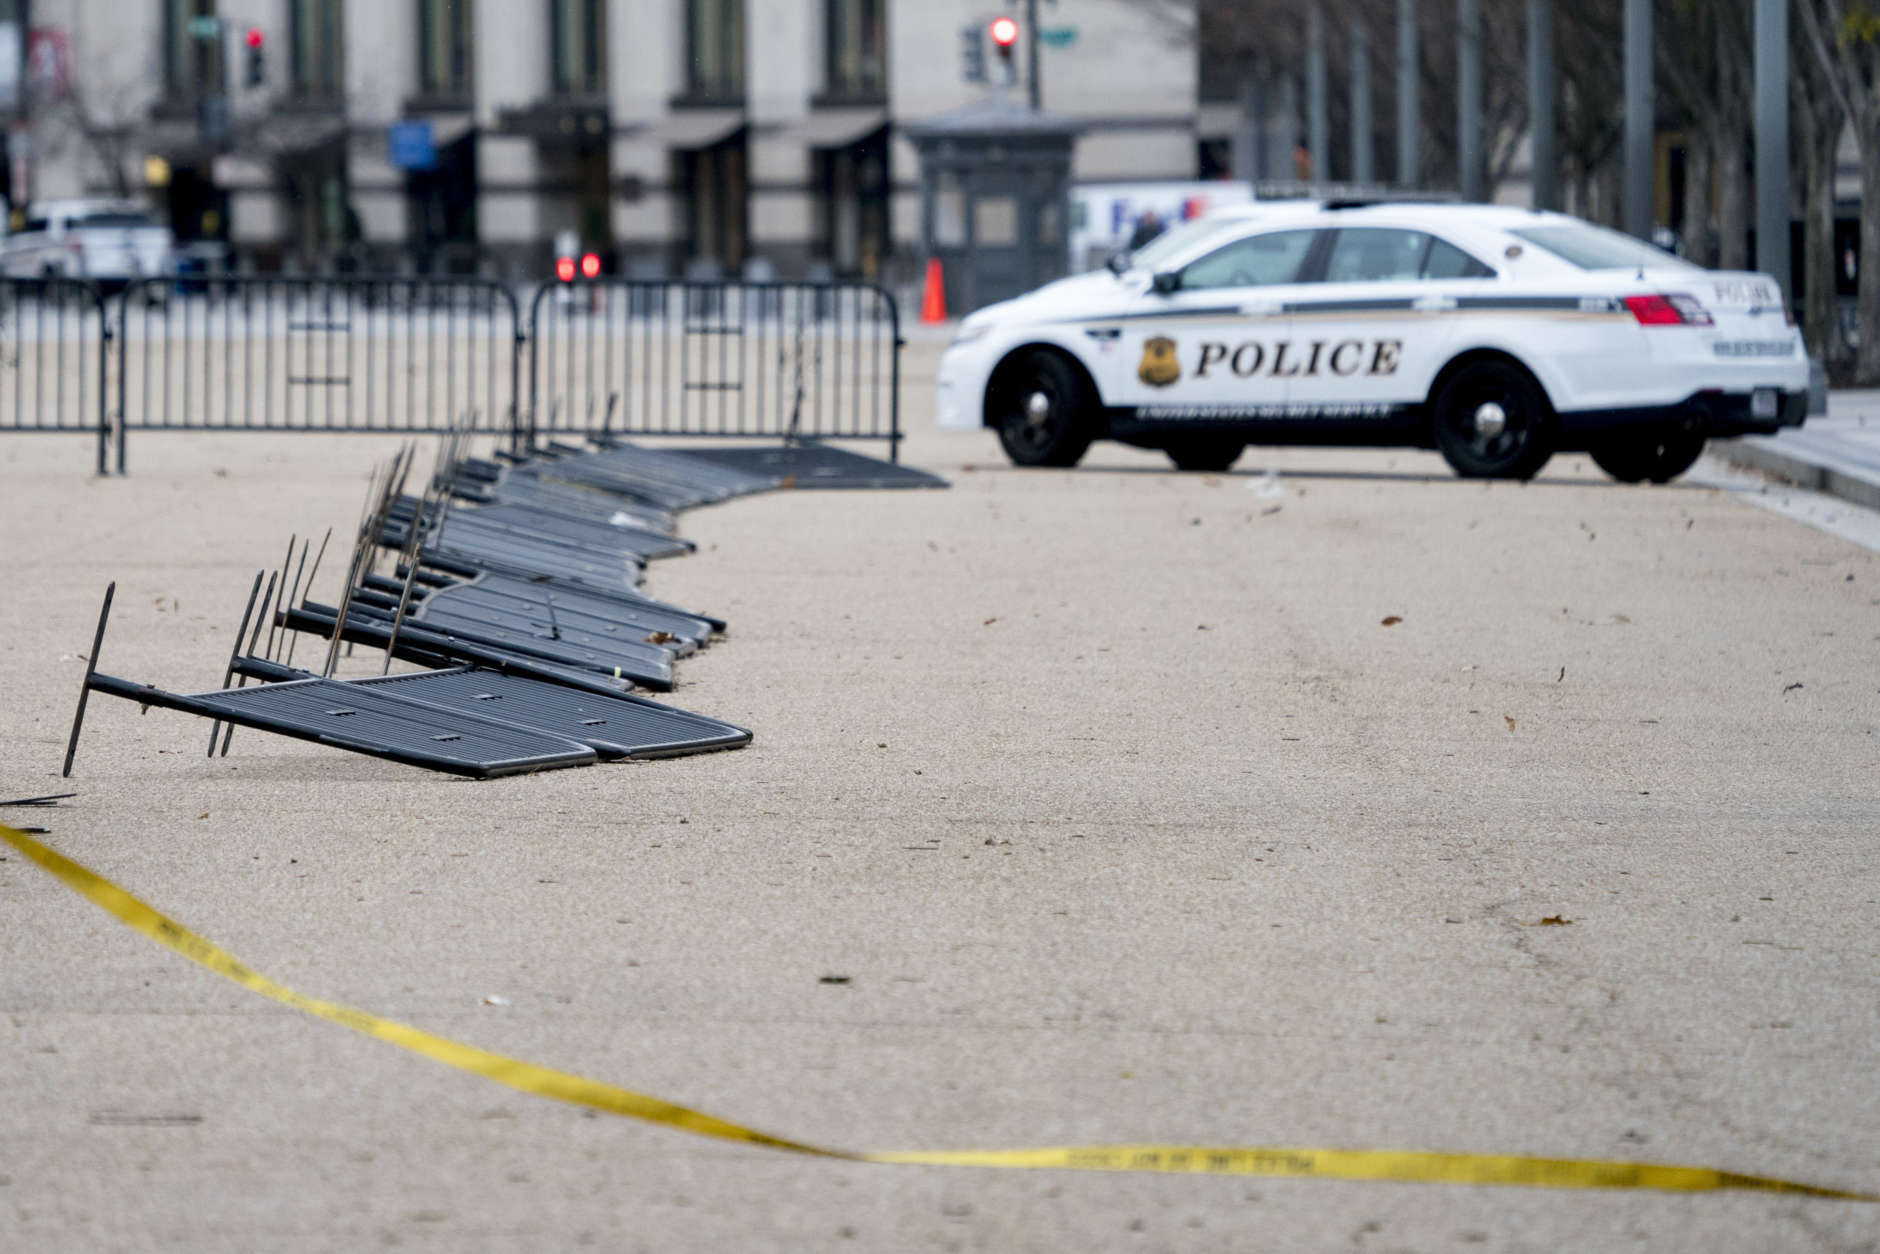 Barricade fencing is knocked over in front of the White House on Pennsylvania Avenue as the region experiences high winds, Friday, March 2, 2018 in Washington. (AP Photo/Andrew Harnik)